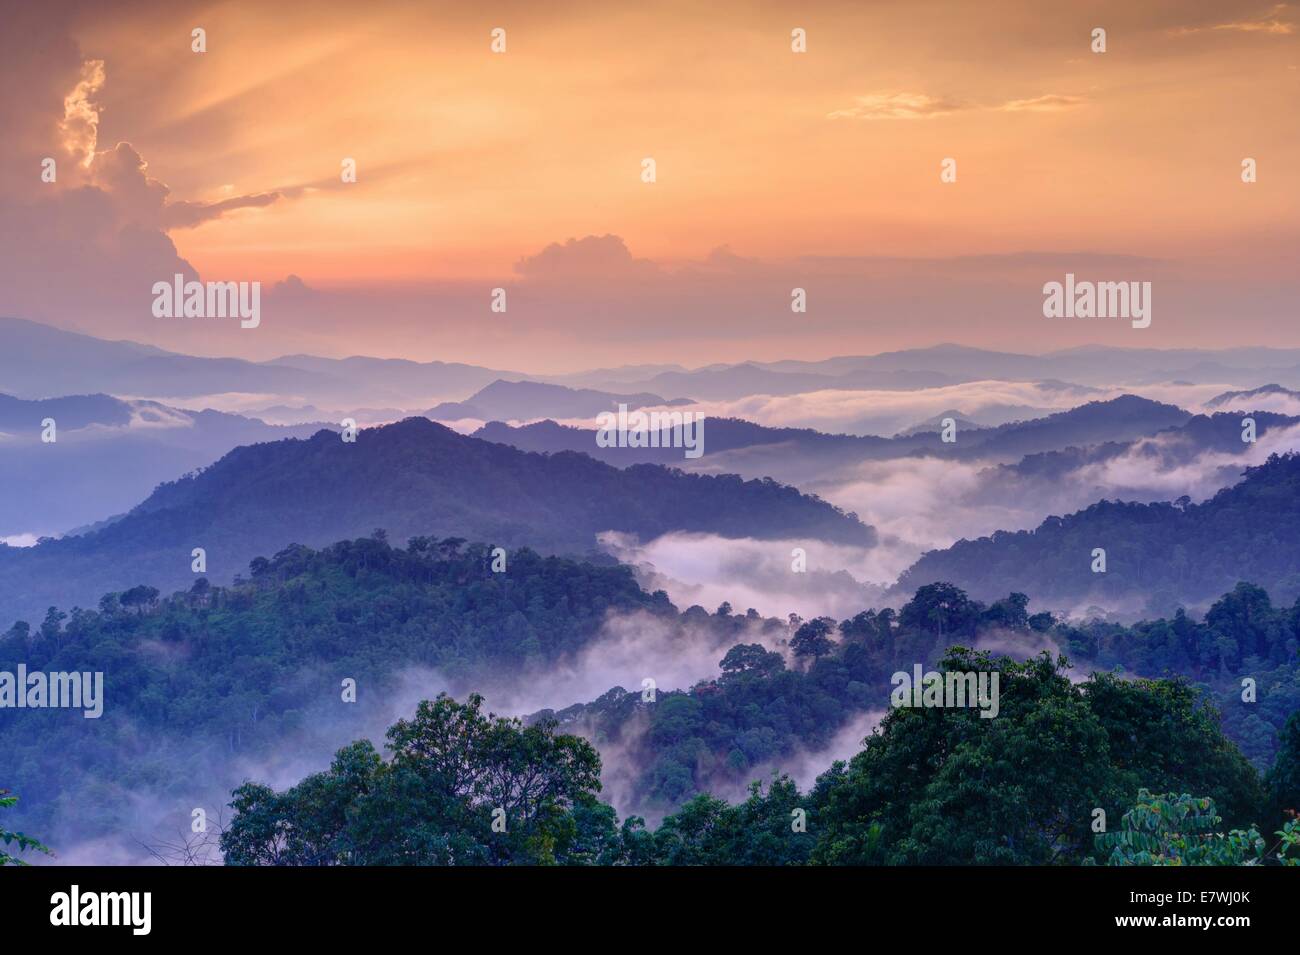 Twilight landscape in rain forest, HDR process from 5 captures. Stock Photo